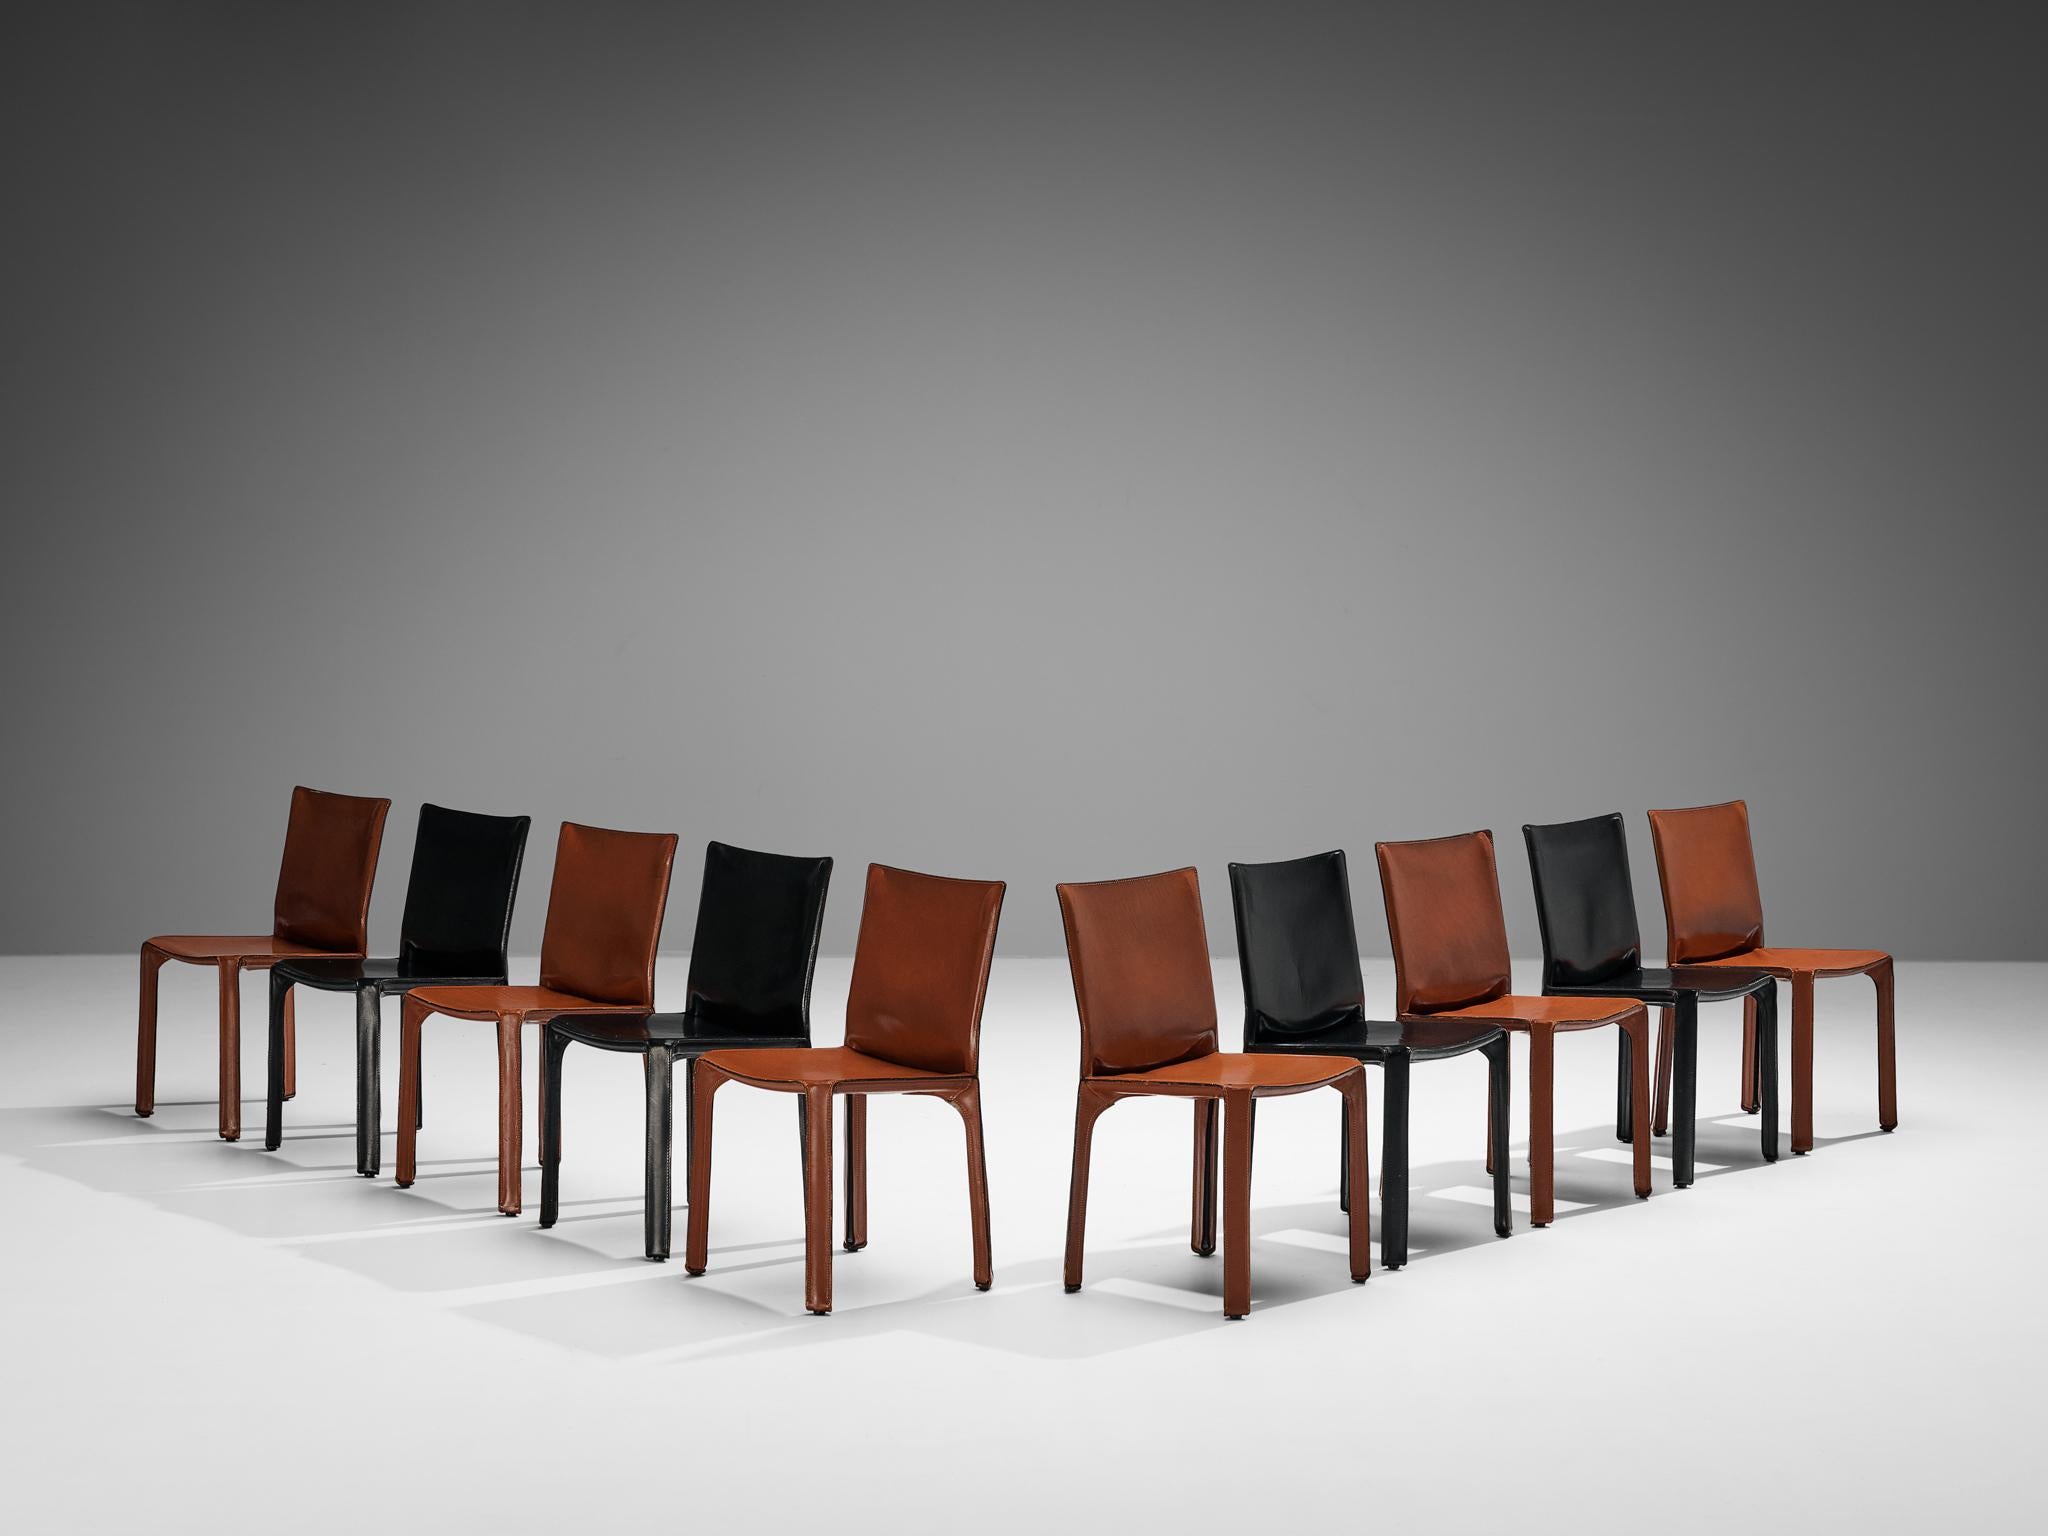 Mario Bellini for Cassina, set of ten 'cab' dining chairs model 412, cognac and black leather, Italy, 1976.

Beautiful bicolor set of ten chairs designed by Mario Bellini and executed in red cognac and black leather.  Conceptually, the chair was